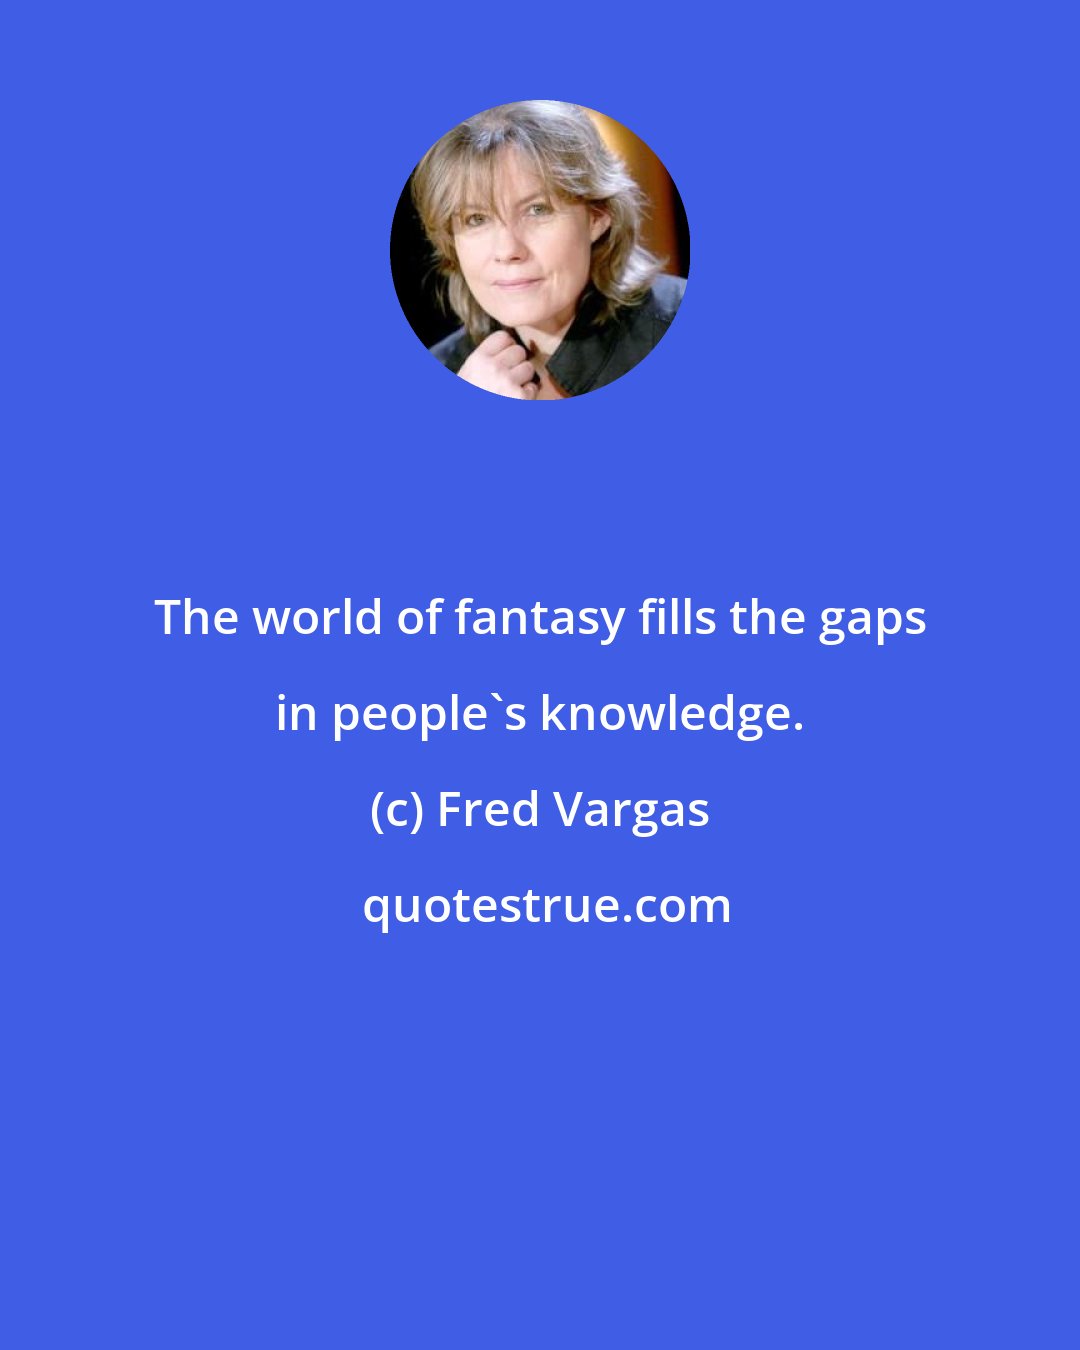 Fred Vargas: The world of fantasy fills the gaps in people's knowledge.